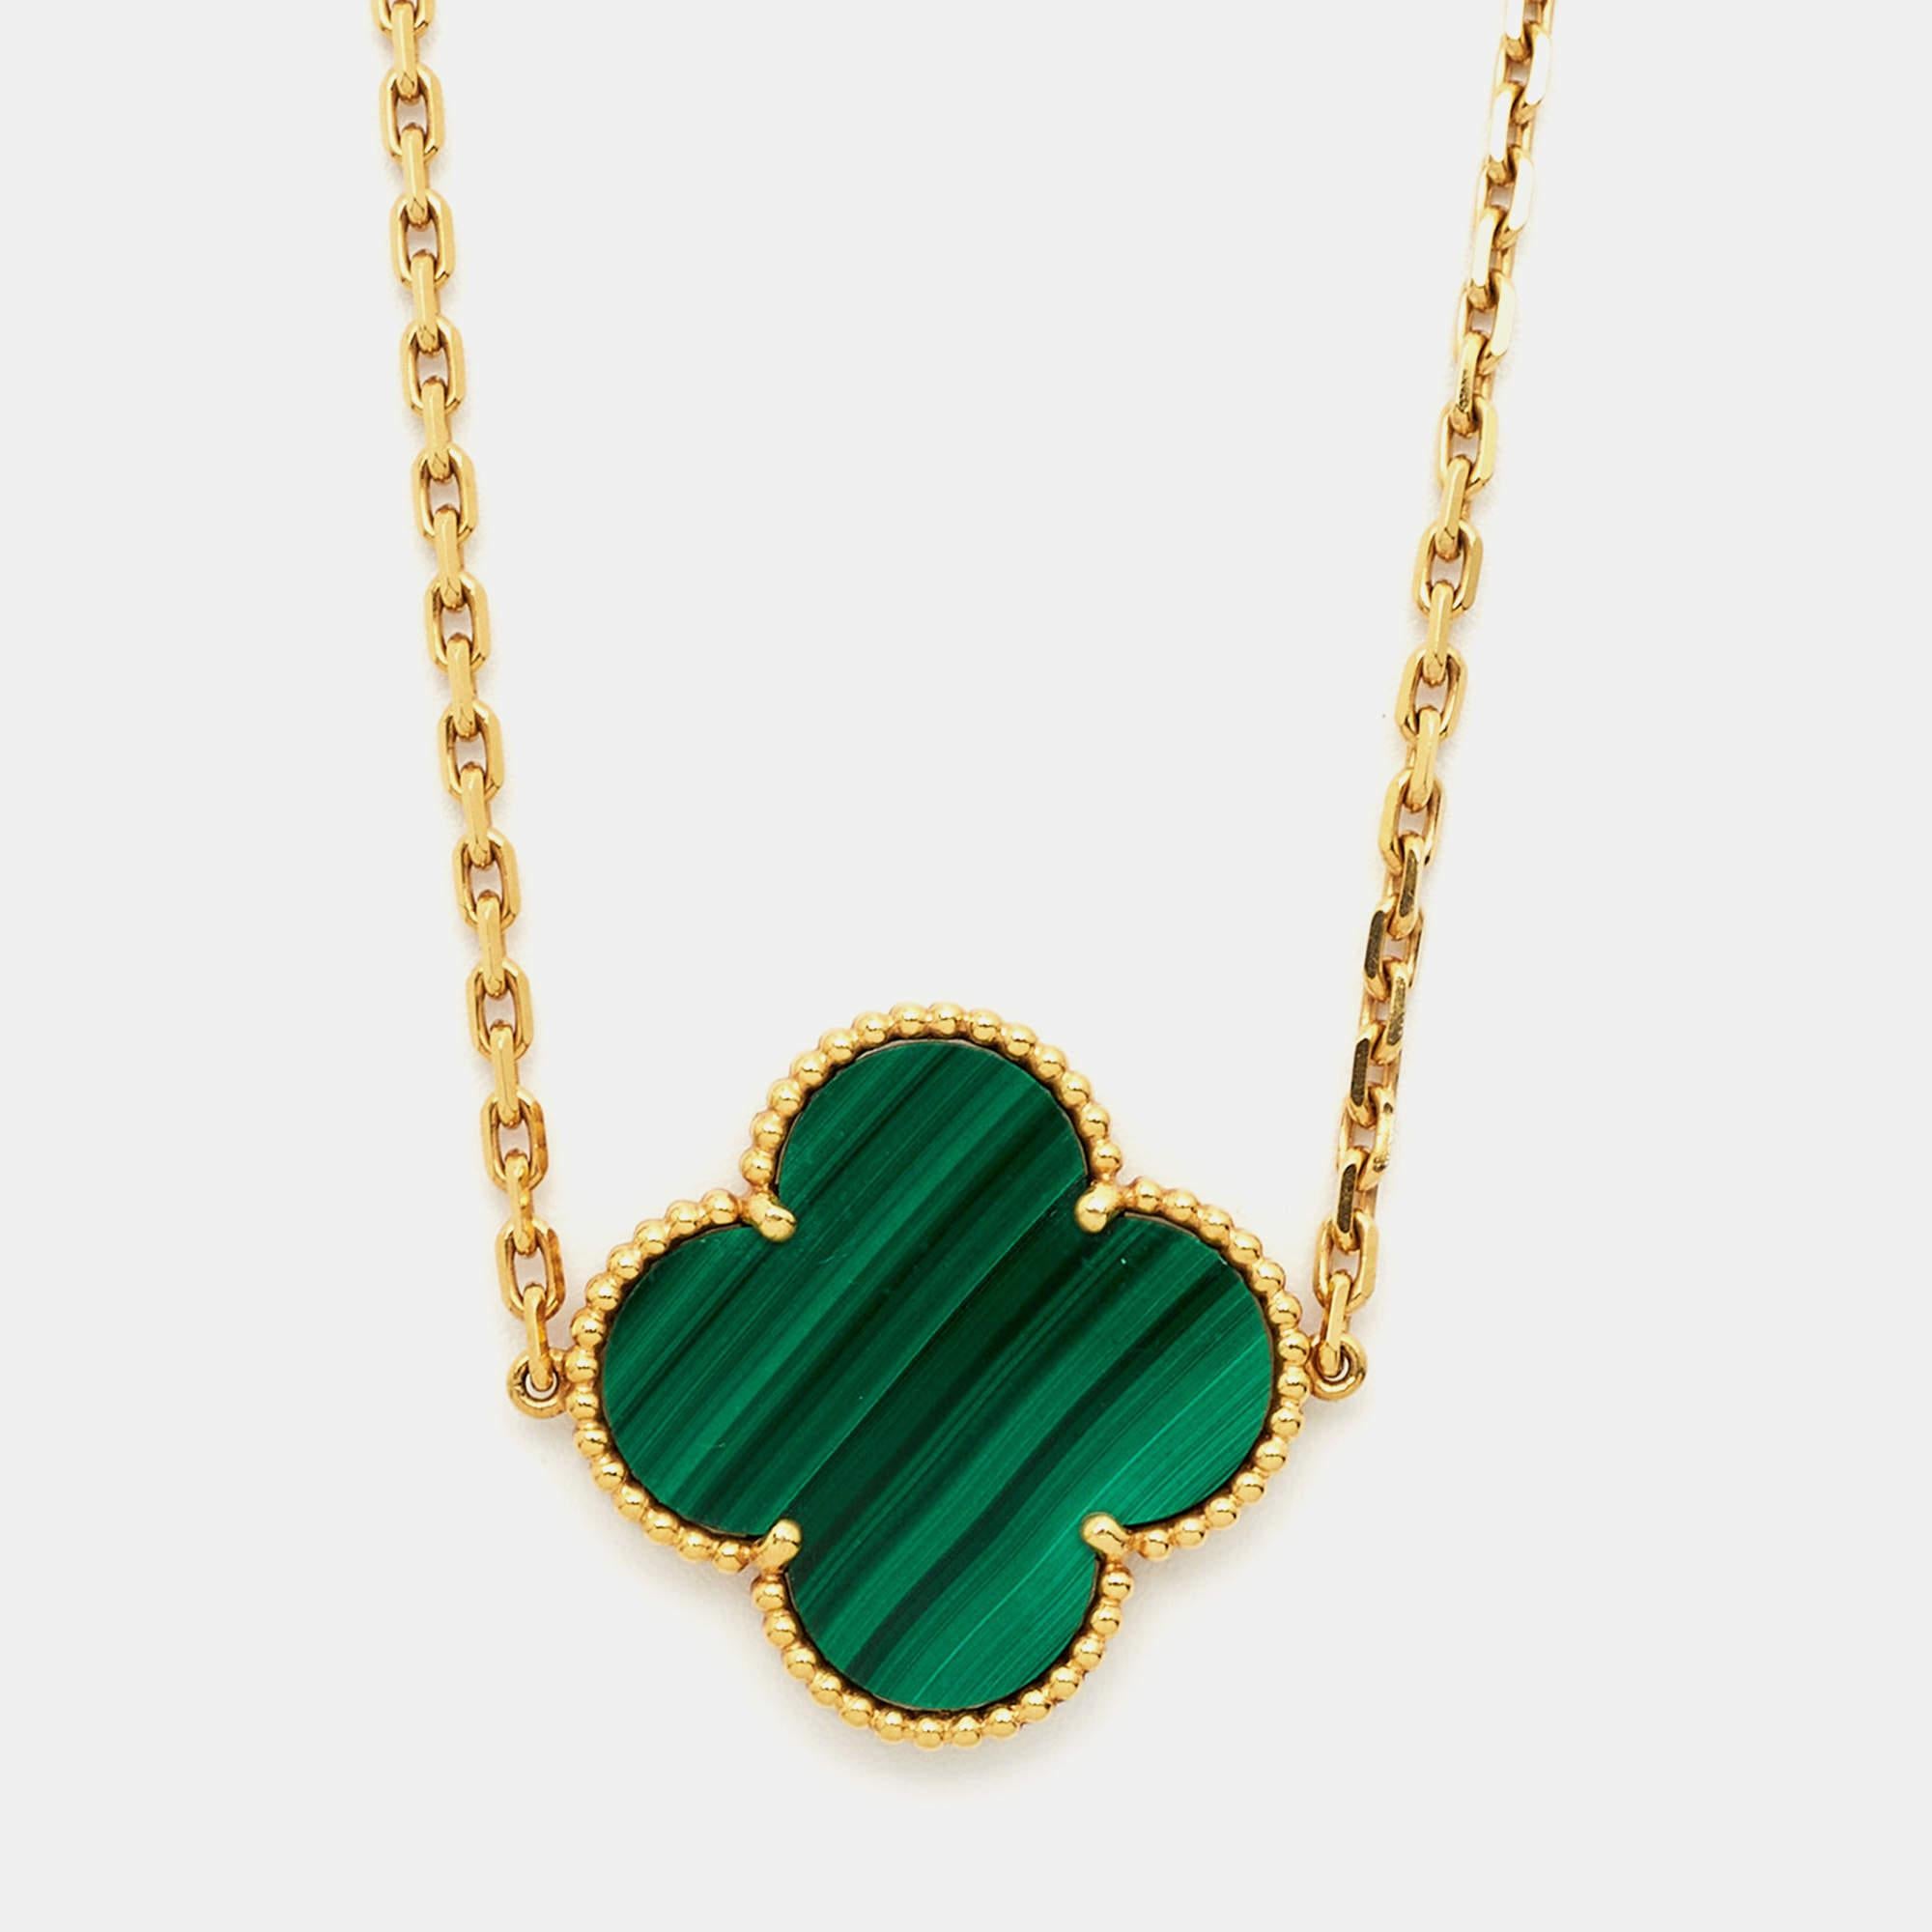 This iconic necklace reflects Van Cleef & Arpels' power to create magical pieces of jewelry. The creation is from the Magic Alhambra line, and it arrives in a harmonious gathering of 16 Alhambra motifs, each laid with malachite. The necklace is made